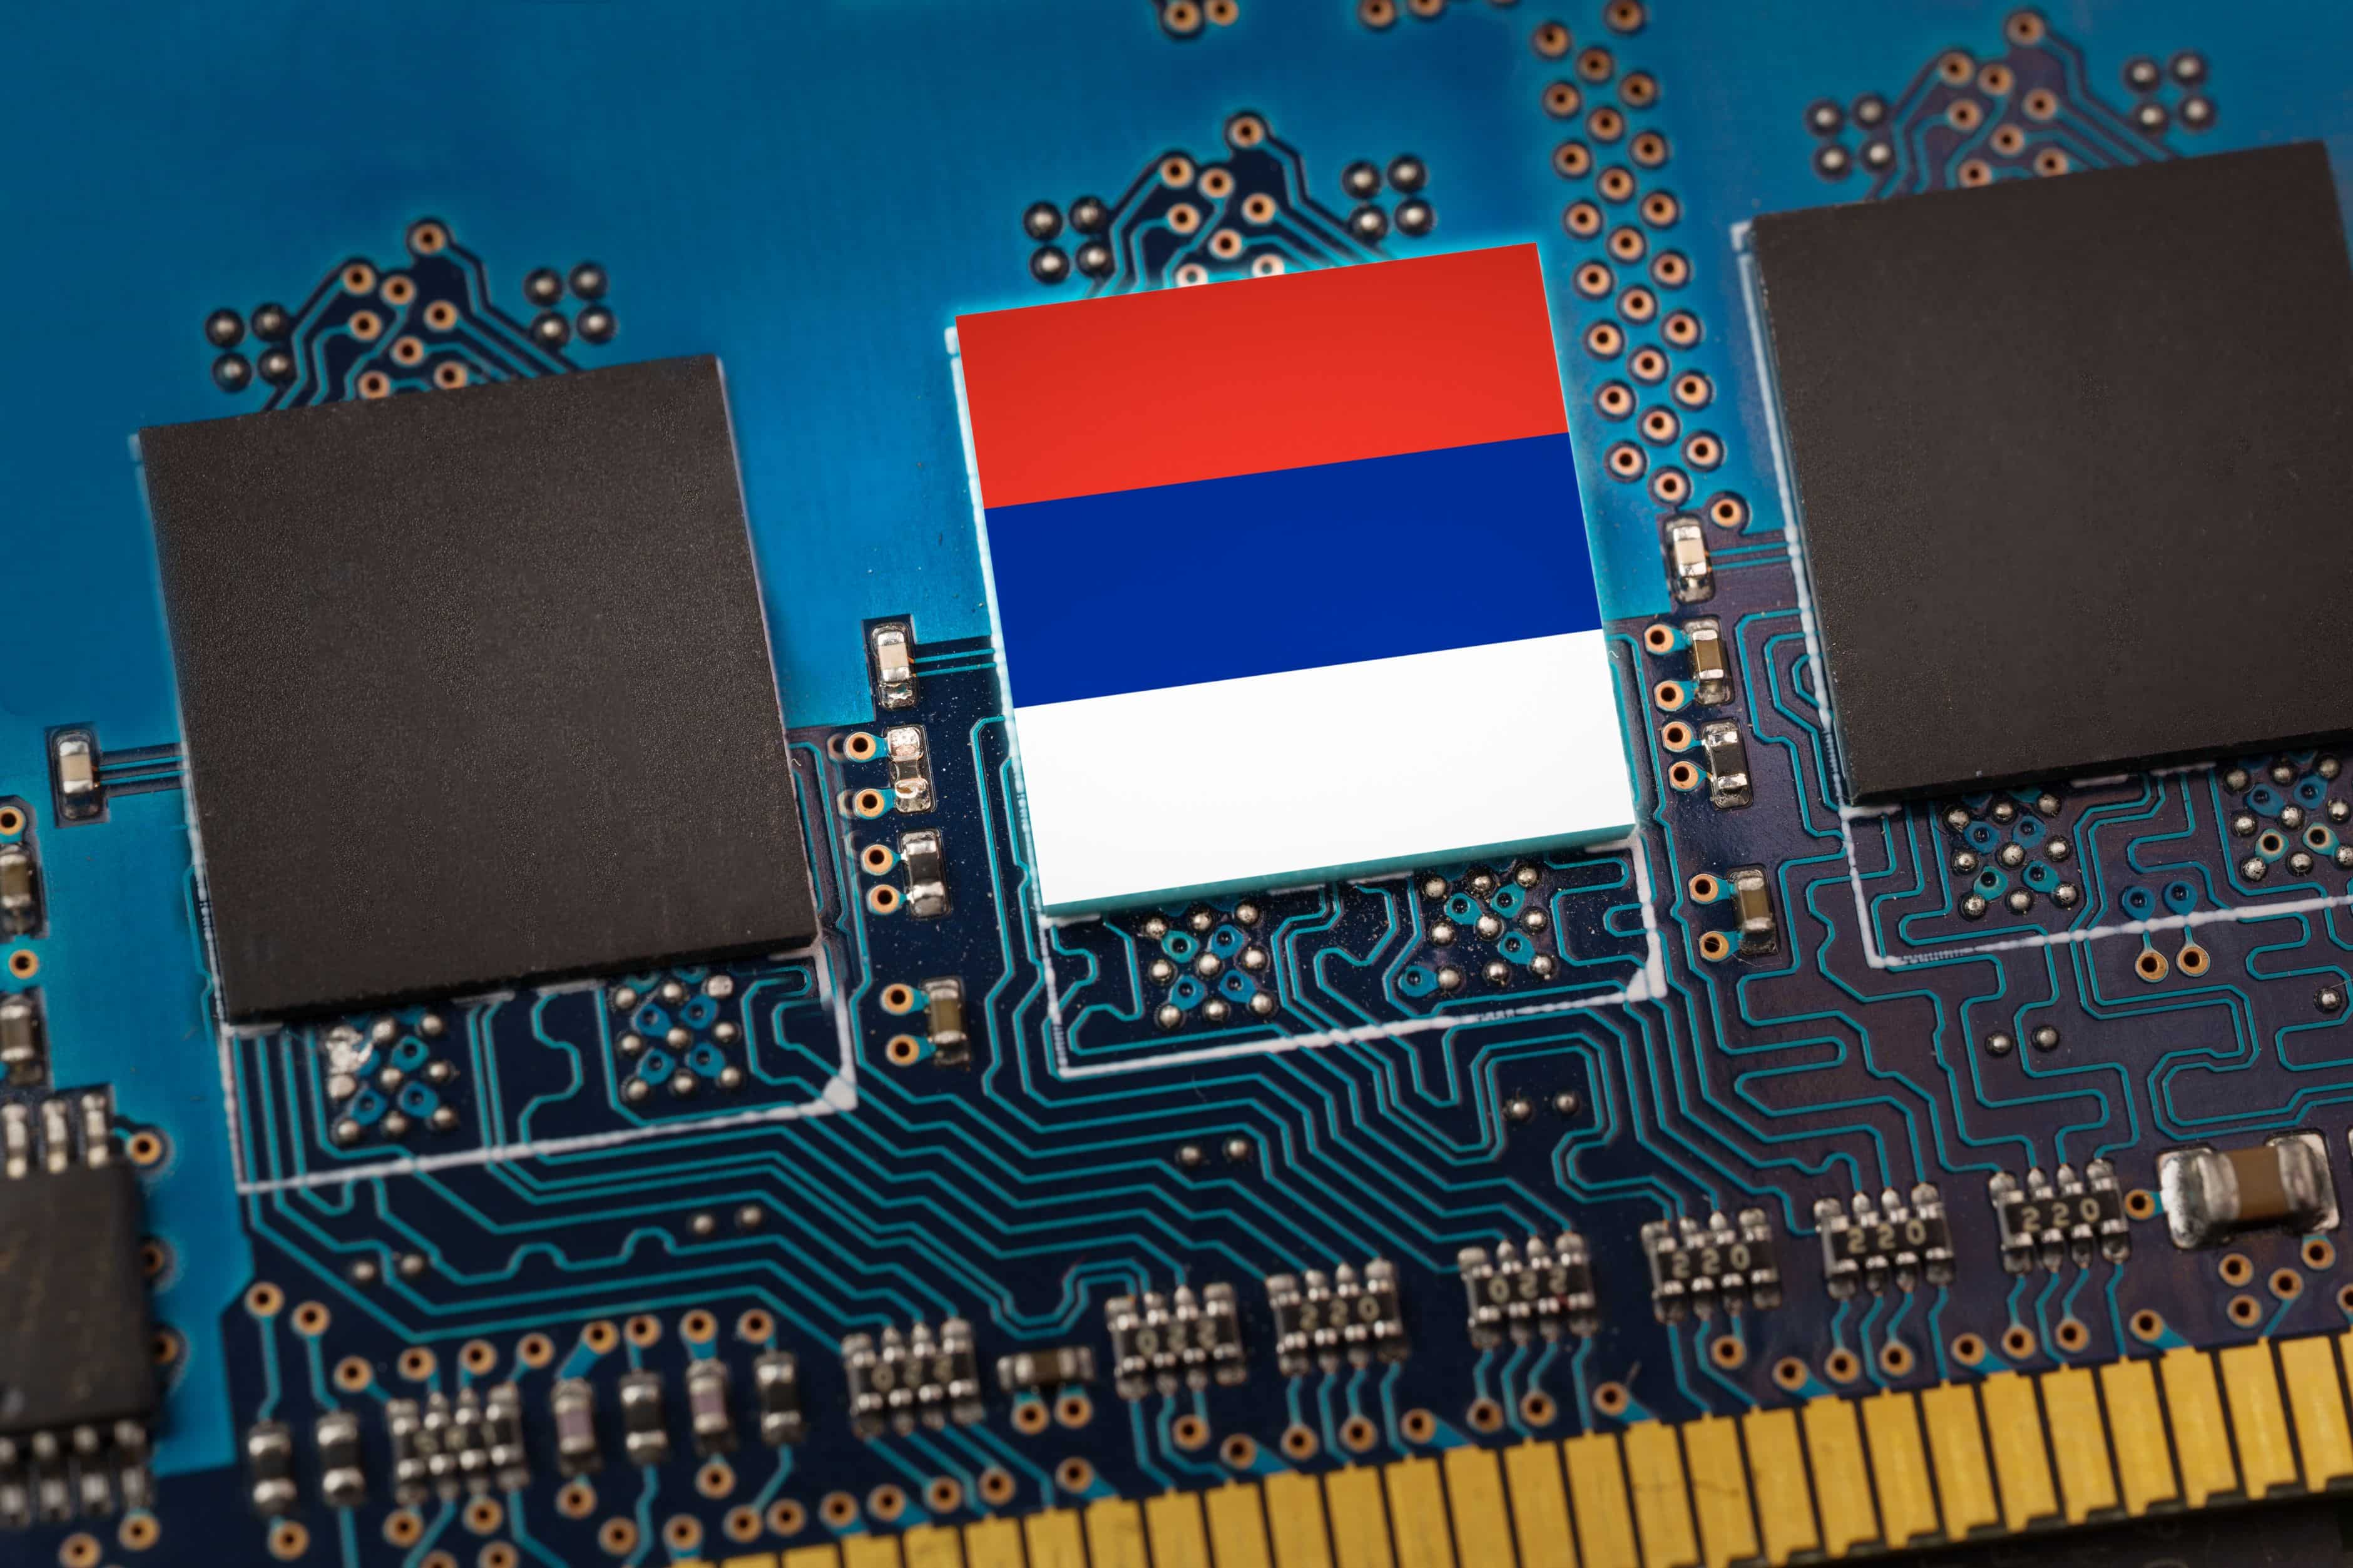 Russian Federation flag in the center of a circuit board. Concept of leadership in technology, artificial intelligence or digital cryptocurrencies